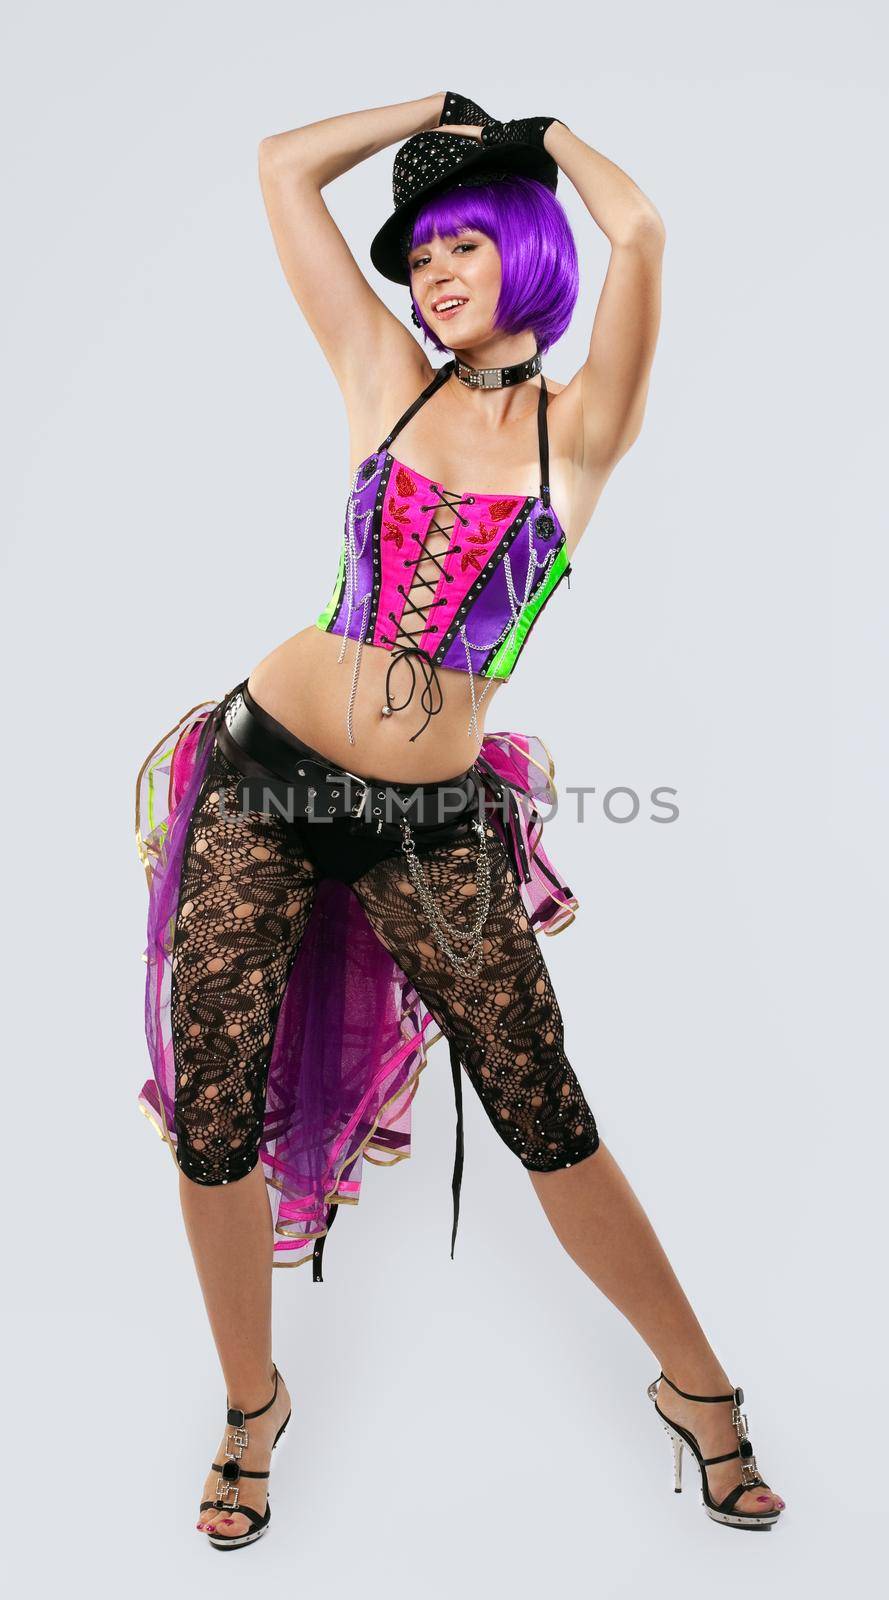 Blond disco girl dance in hat and color corset